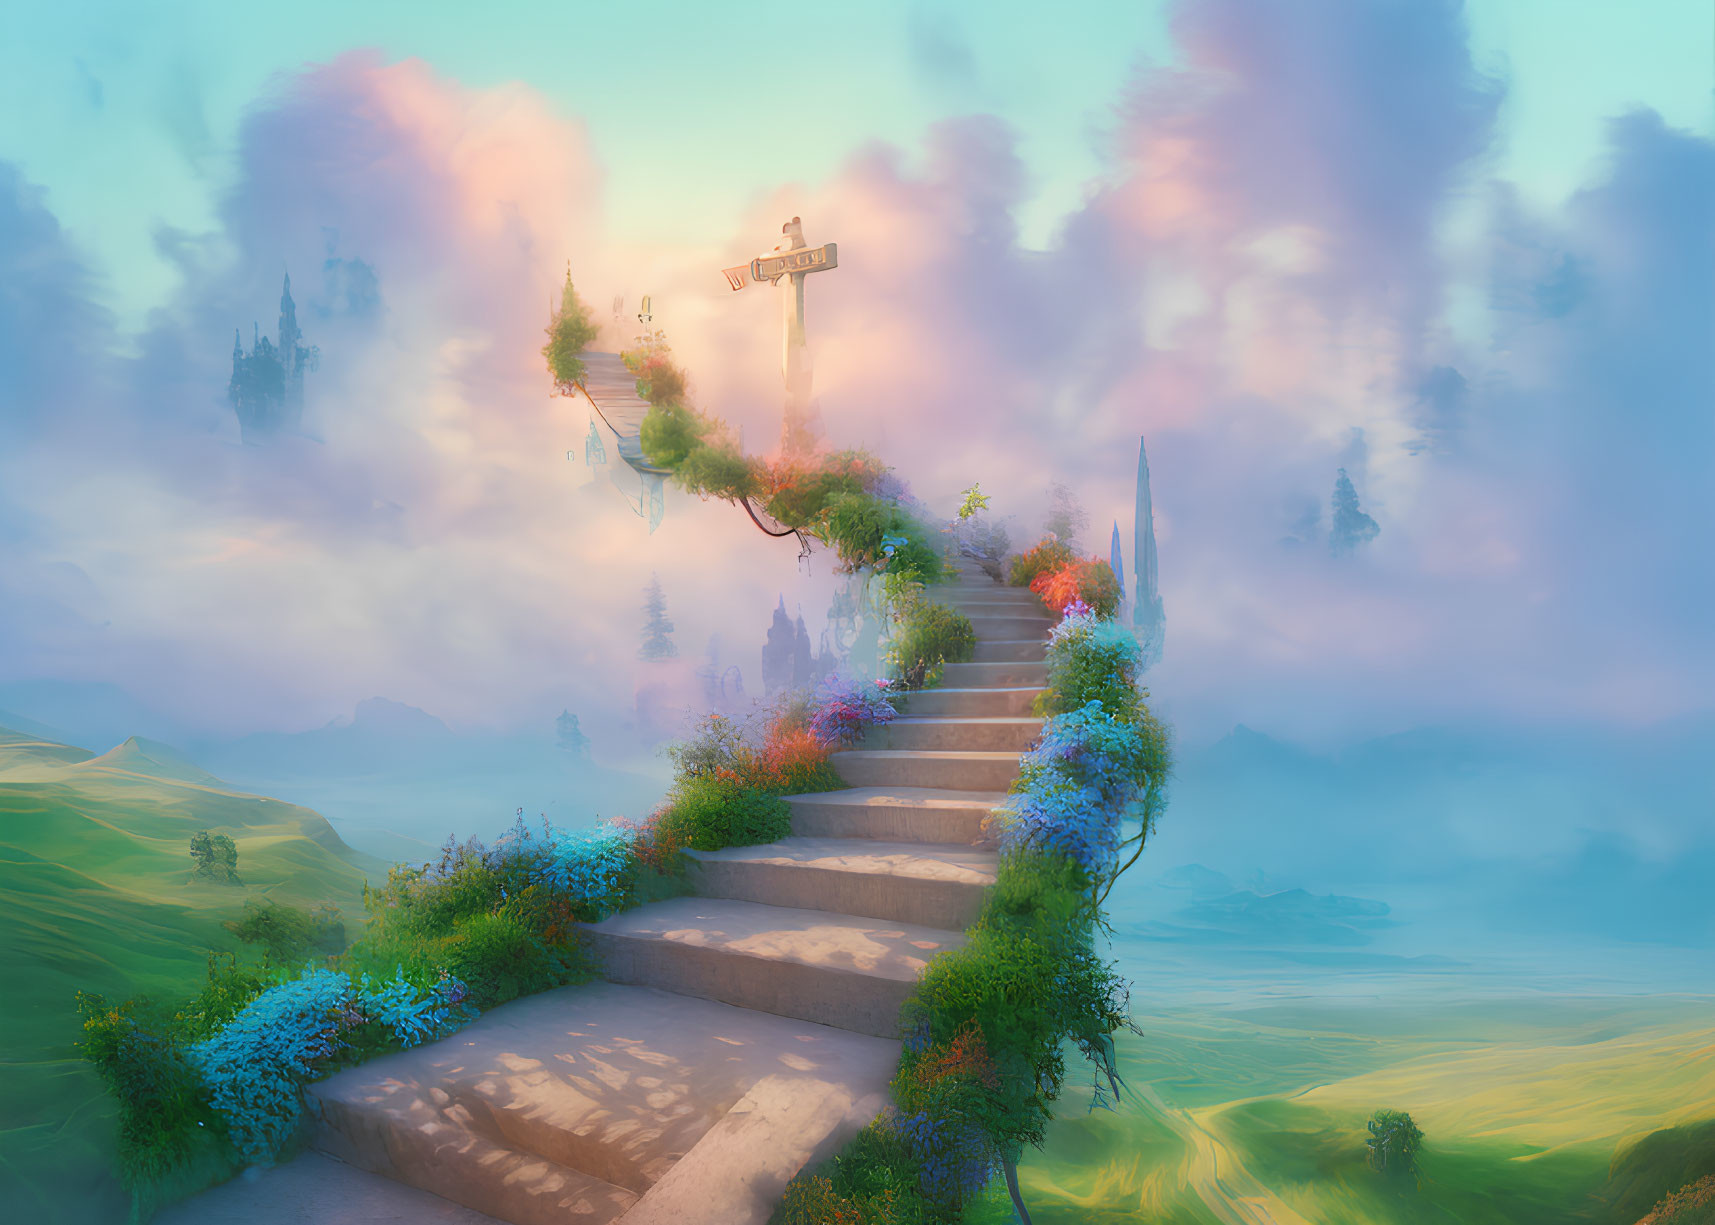 Colorful Flower Staircase and Floating Signpost in Cloudy Sky